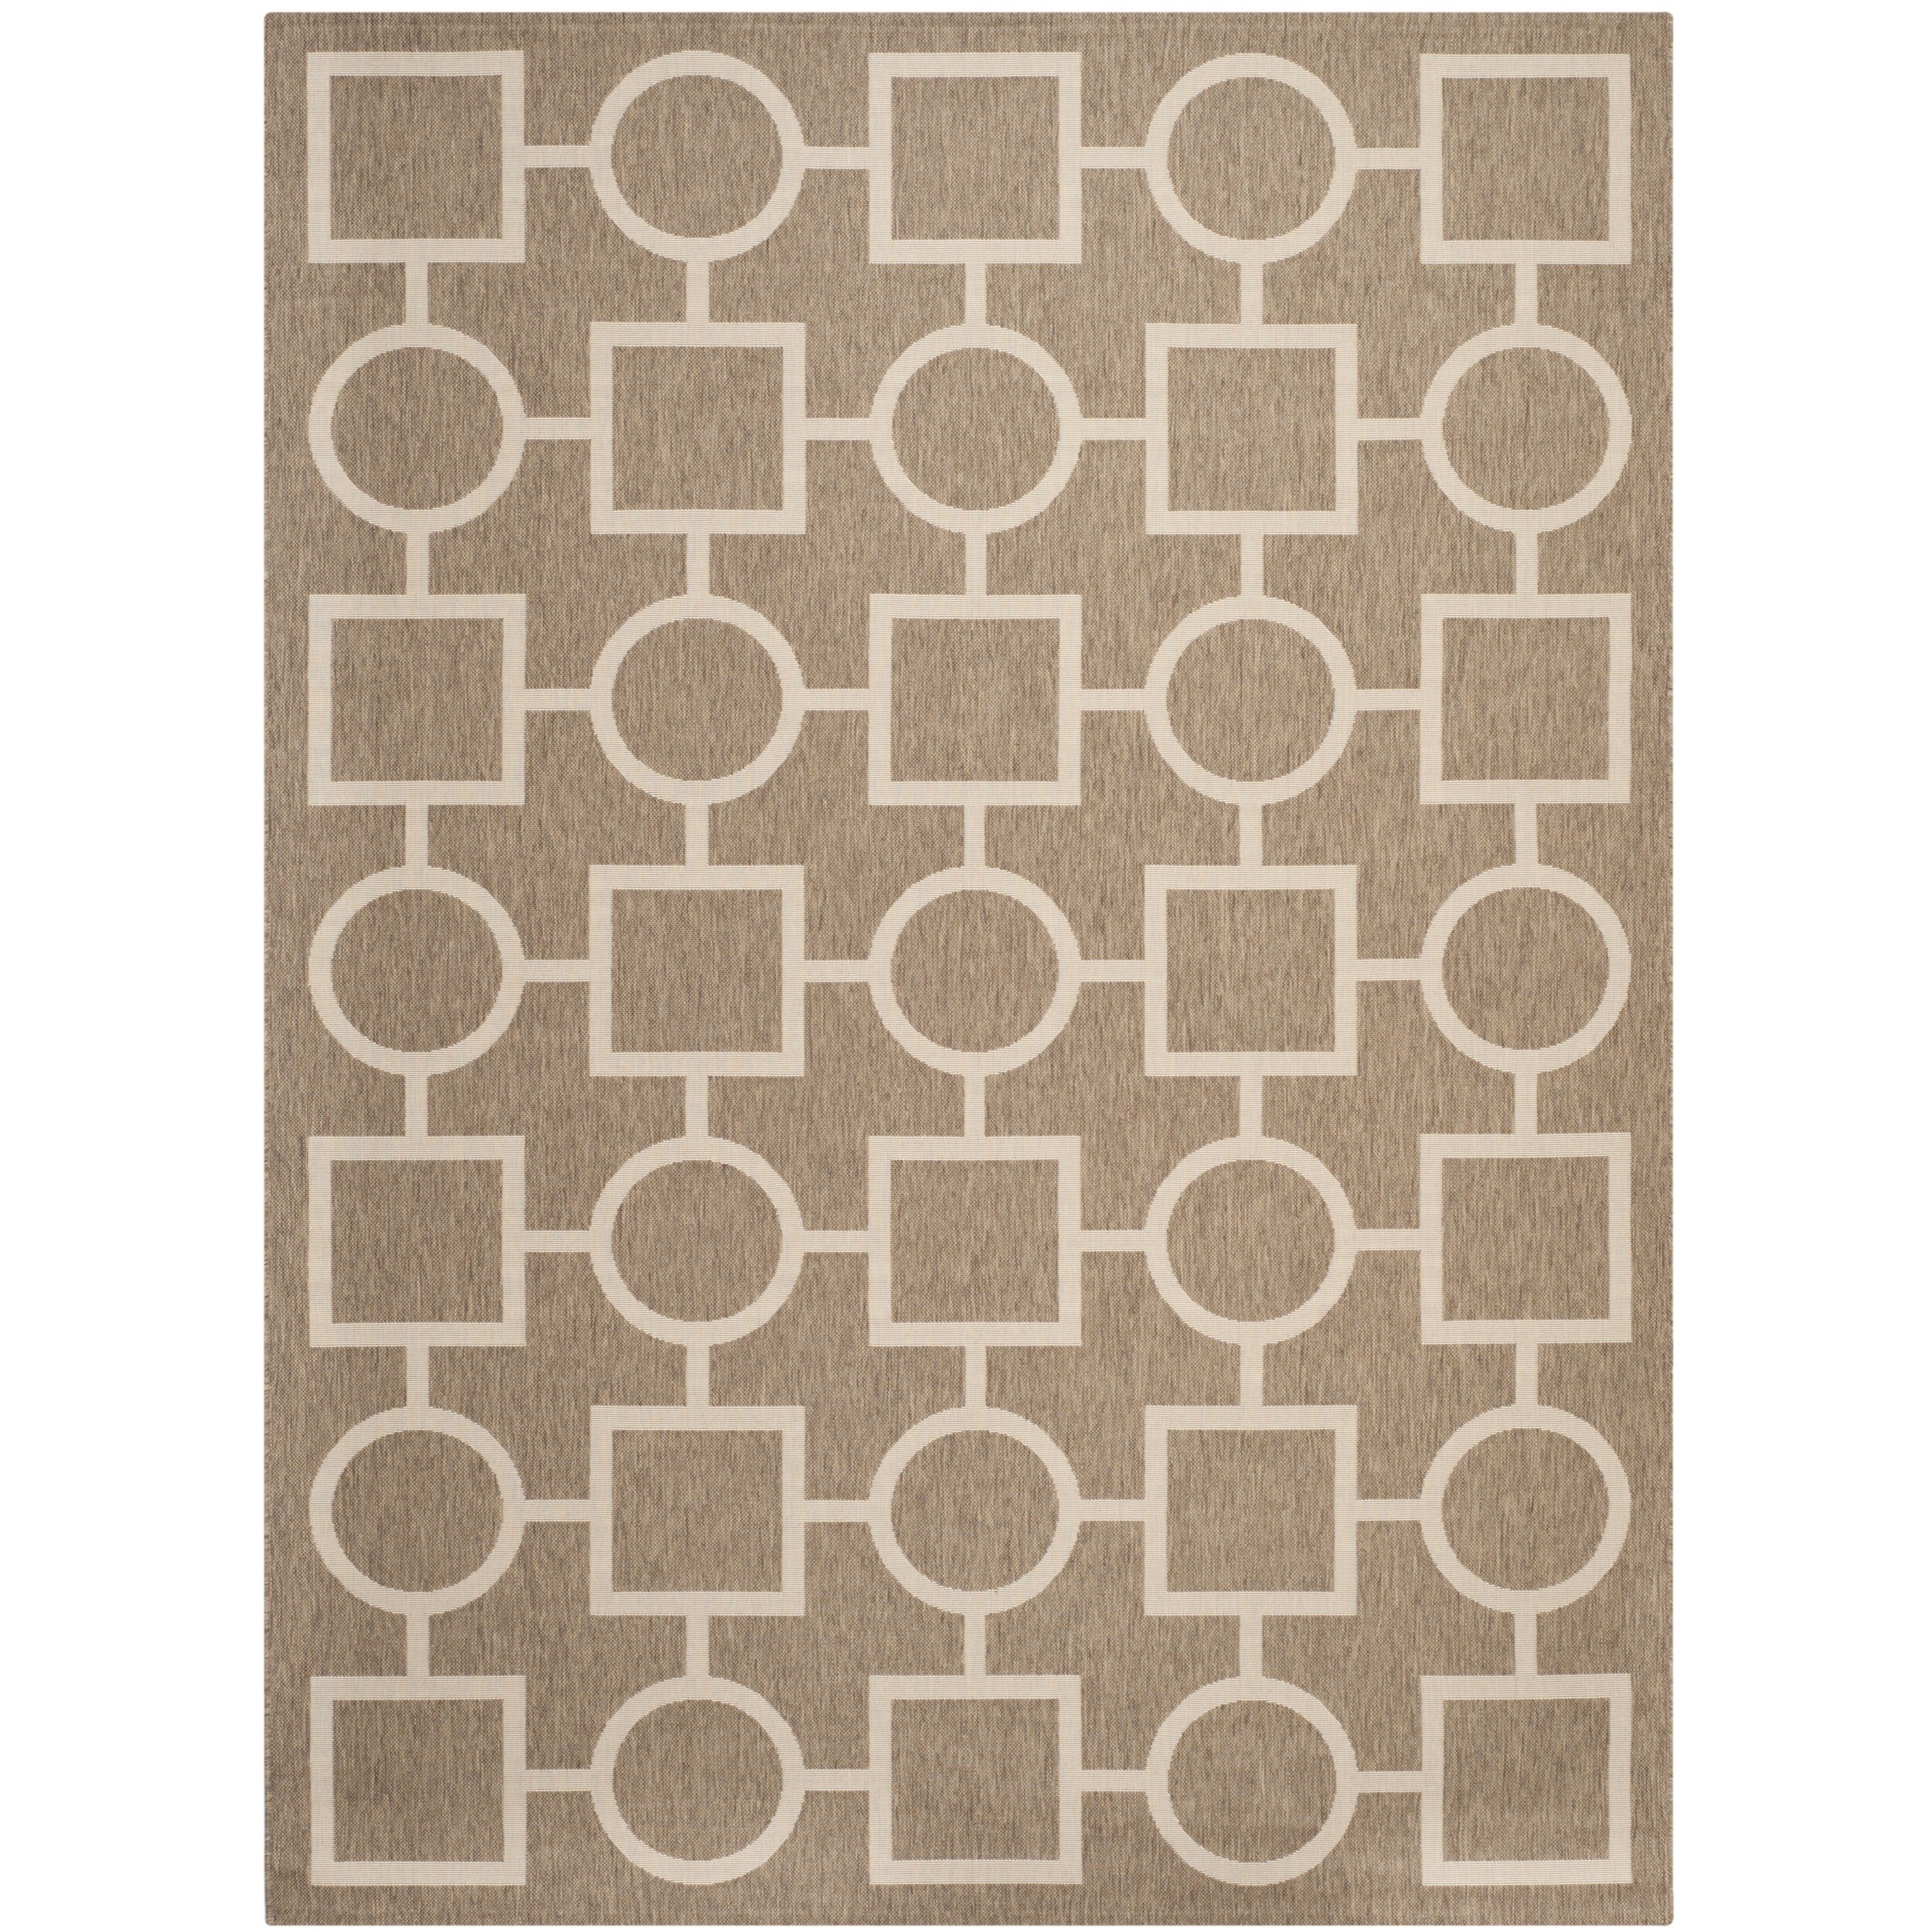 Safavieh Indoor/ Outdoor Courtyard Squares And Circles Brown/ Bone Rug (8 X 11)